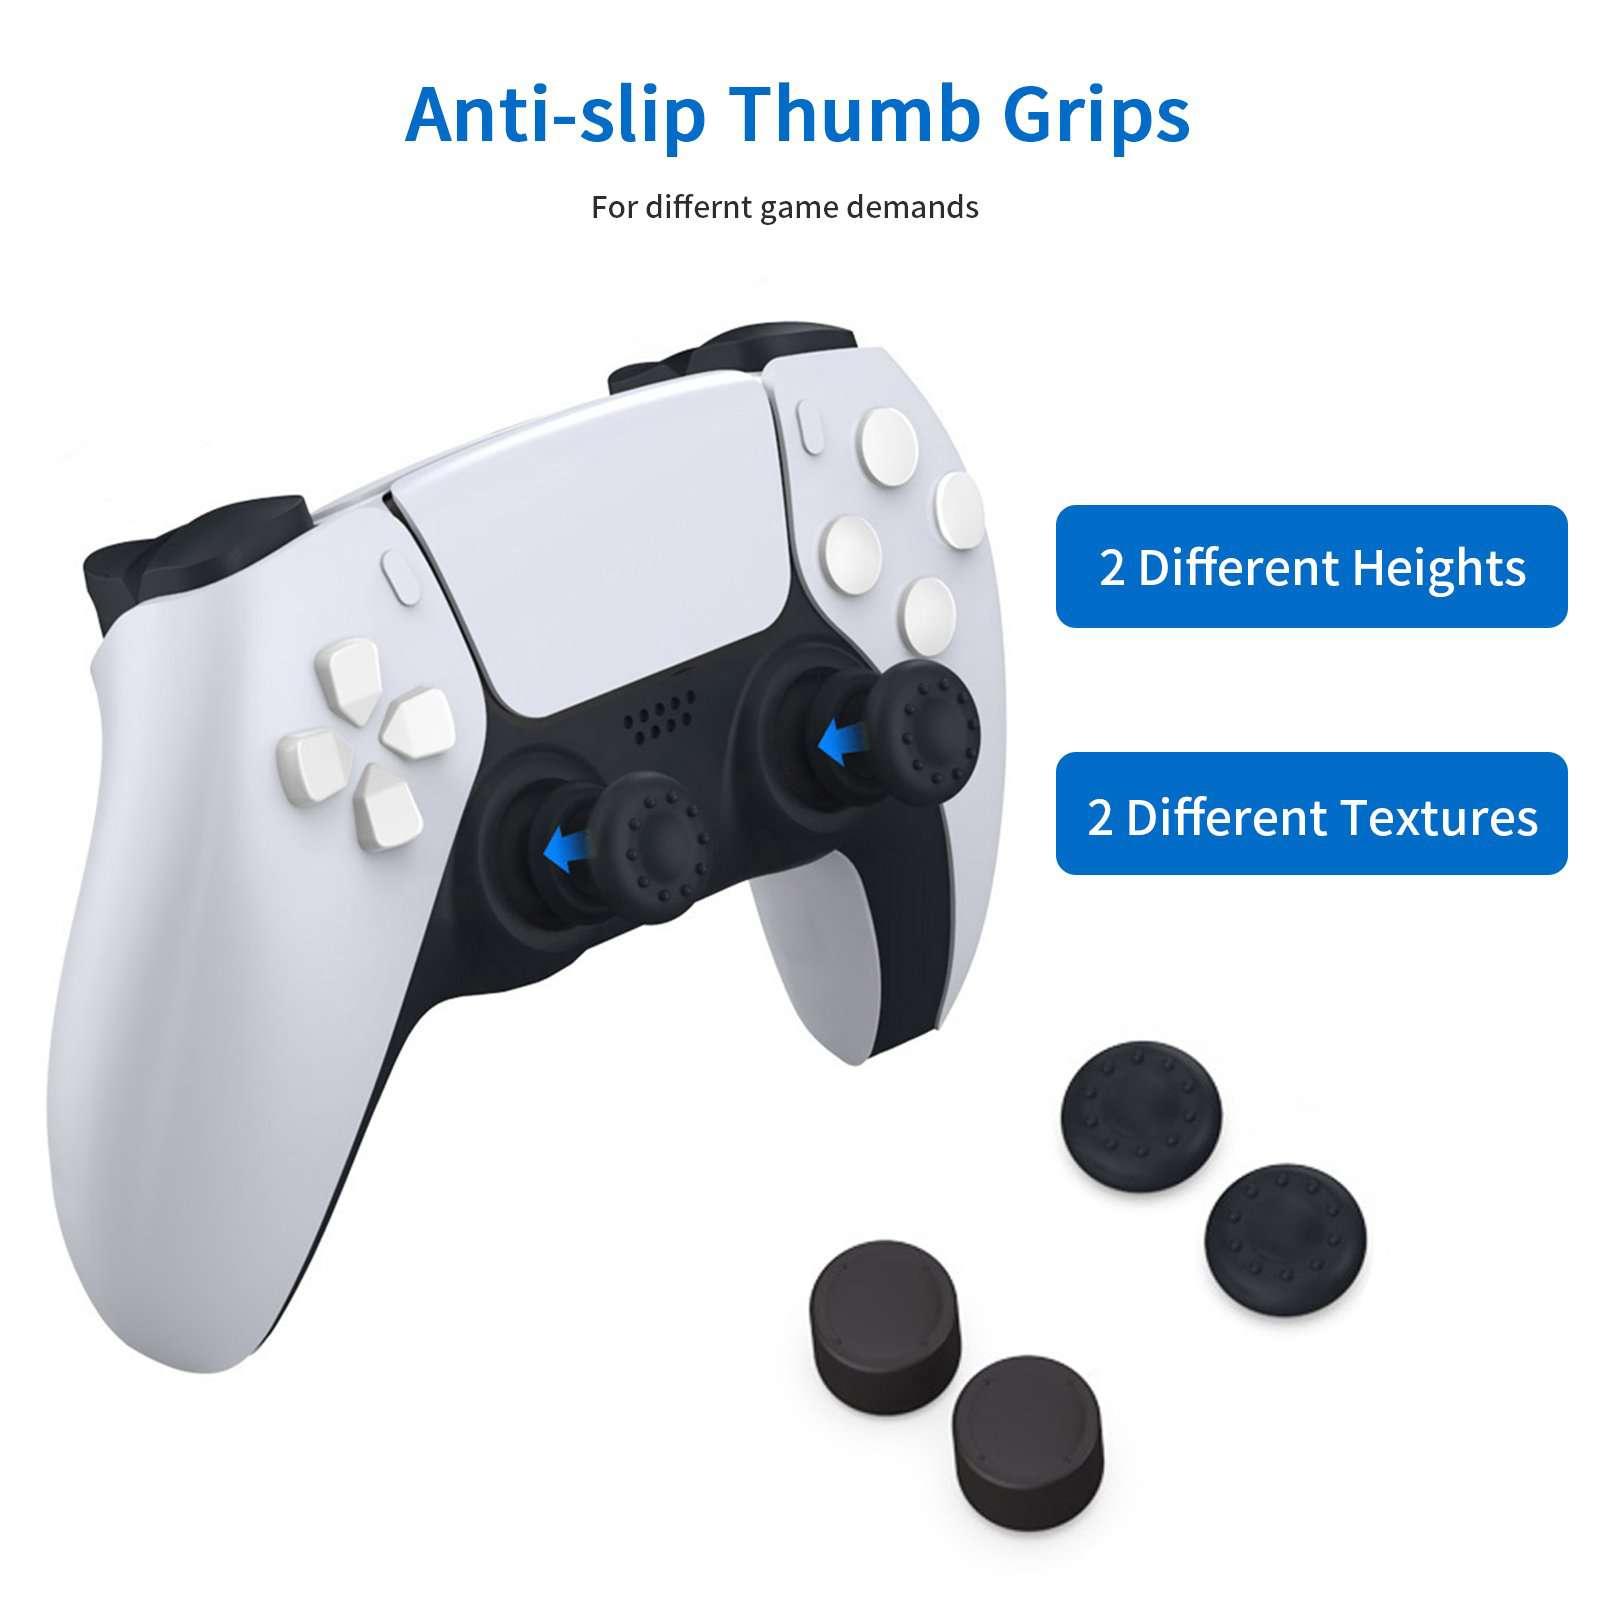 Package includes PS5 controller compatible Thumb Grips with 2 Heights and 2 Textures